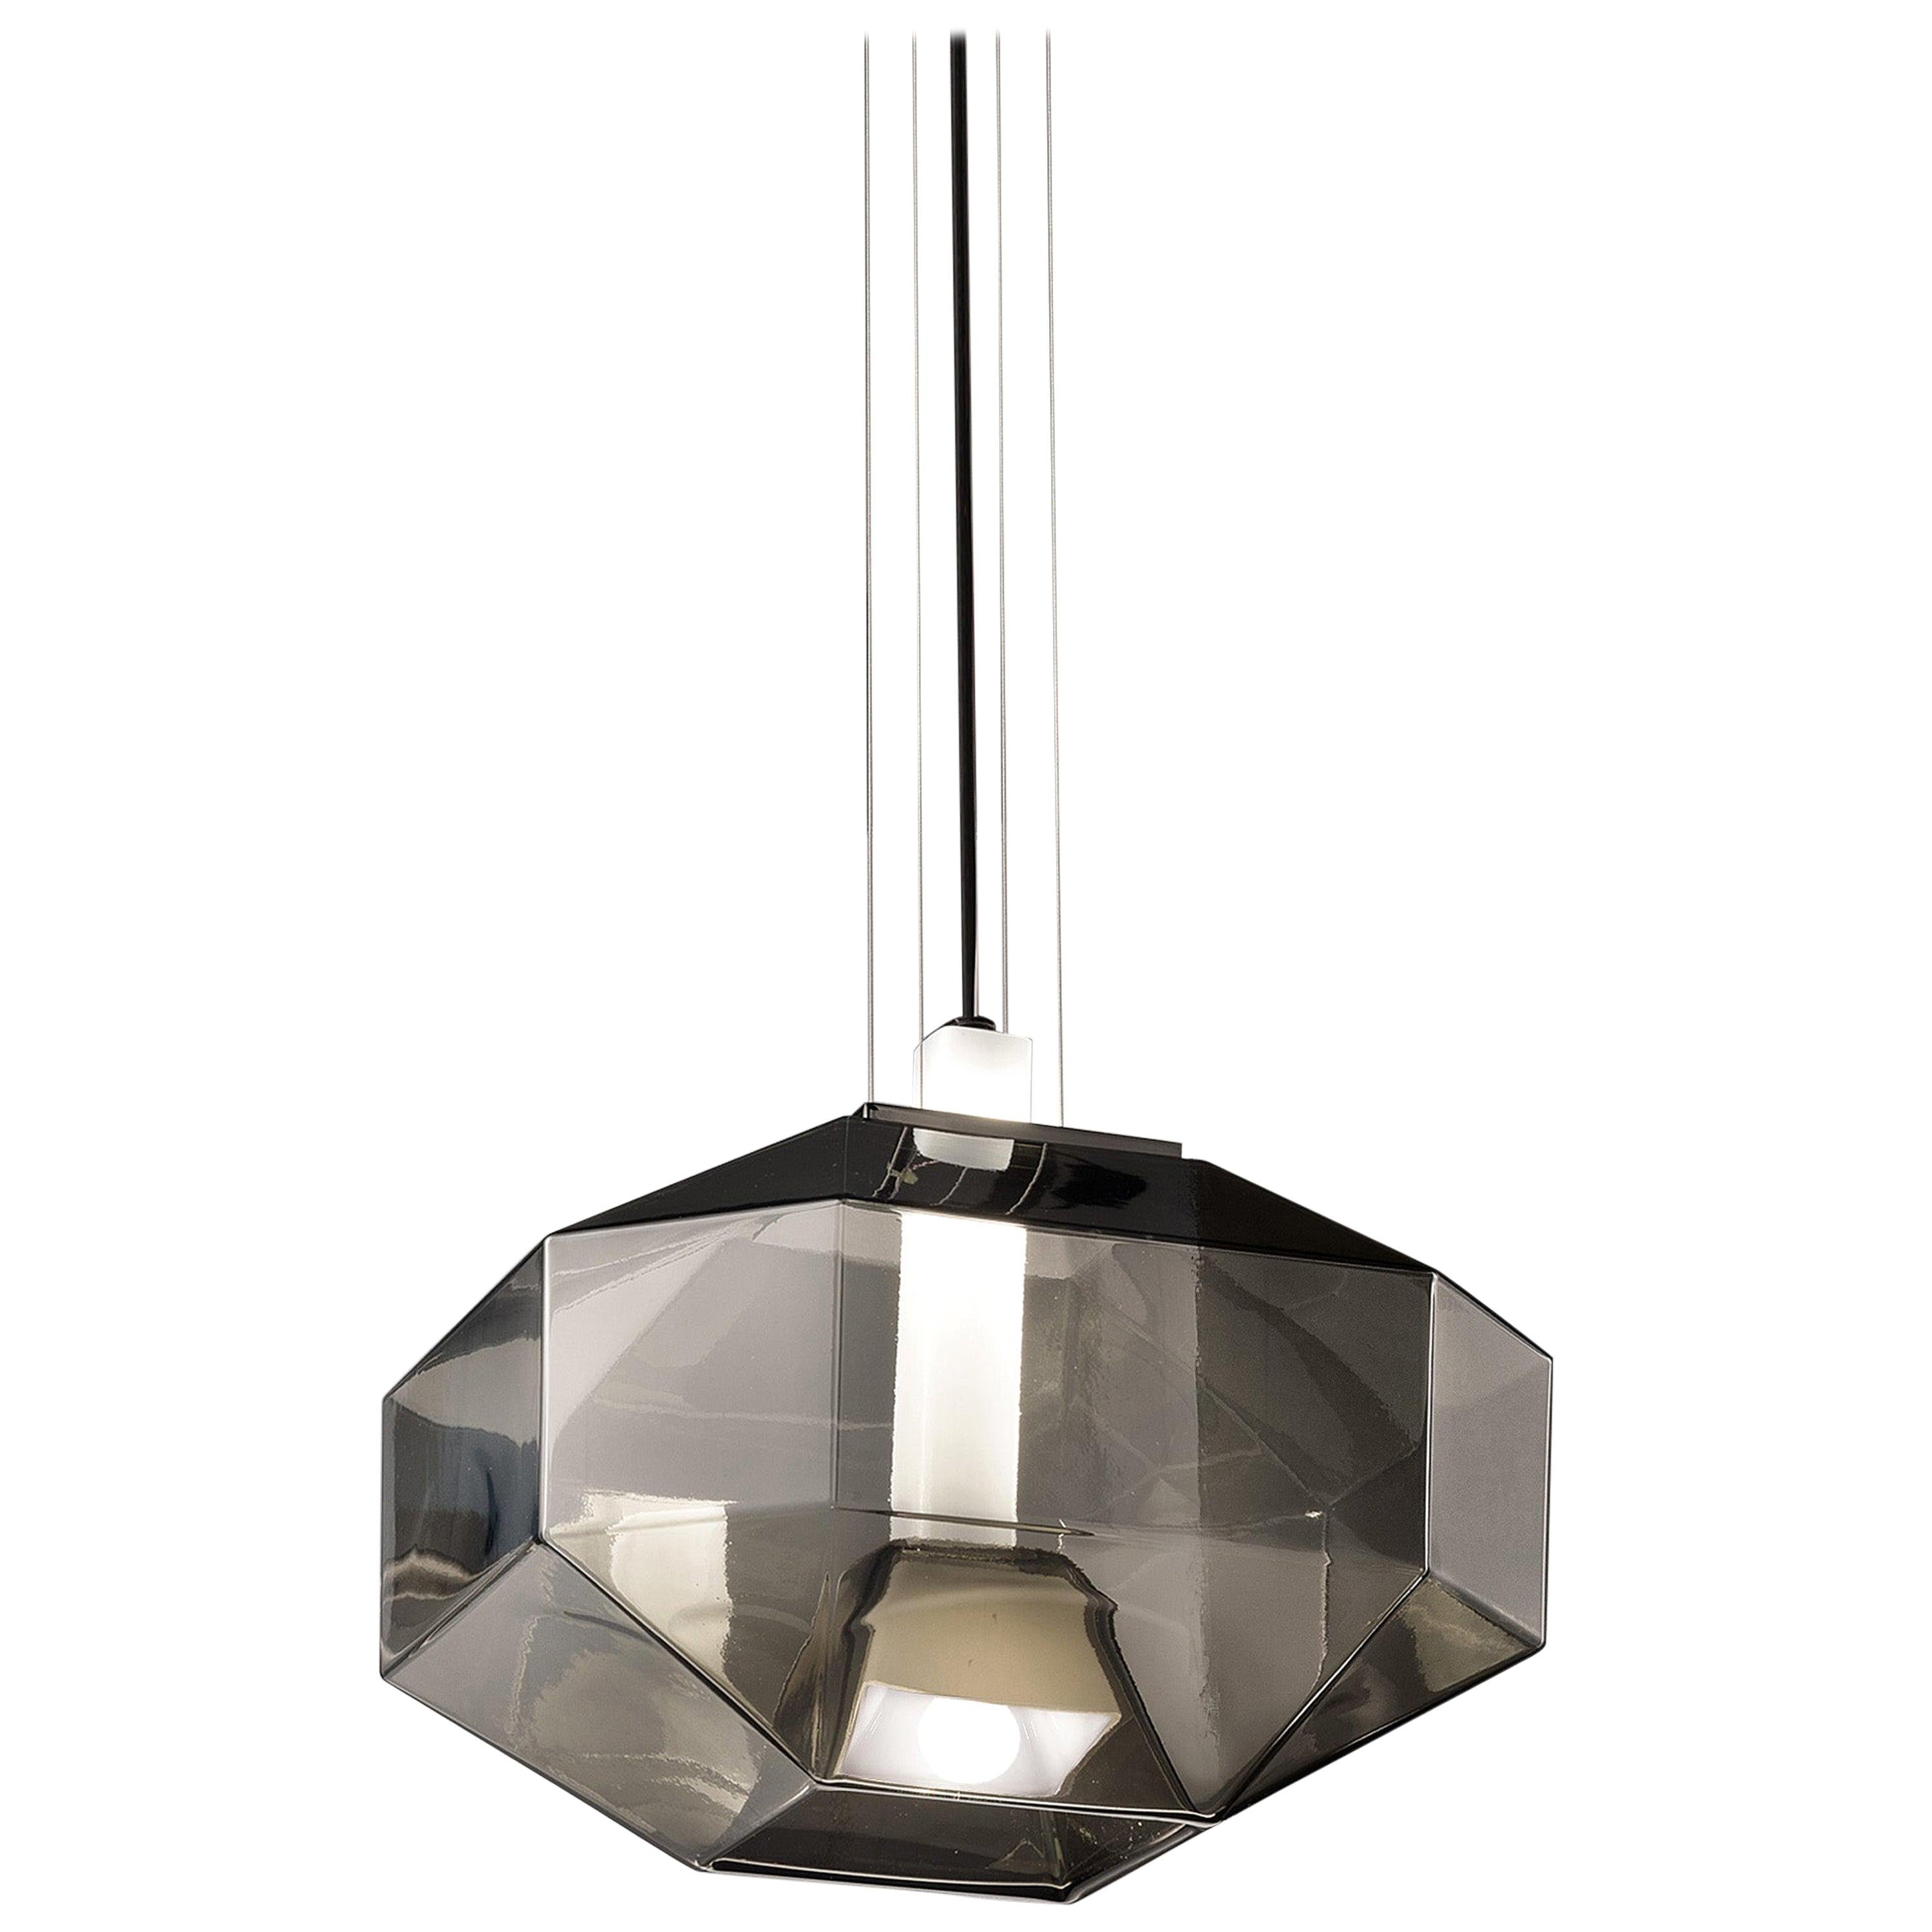 Vistosi Stone SP LED Pendant Light in Smoke and White by Hangar Design Group For Sale